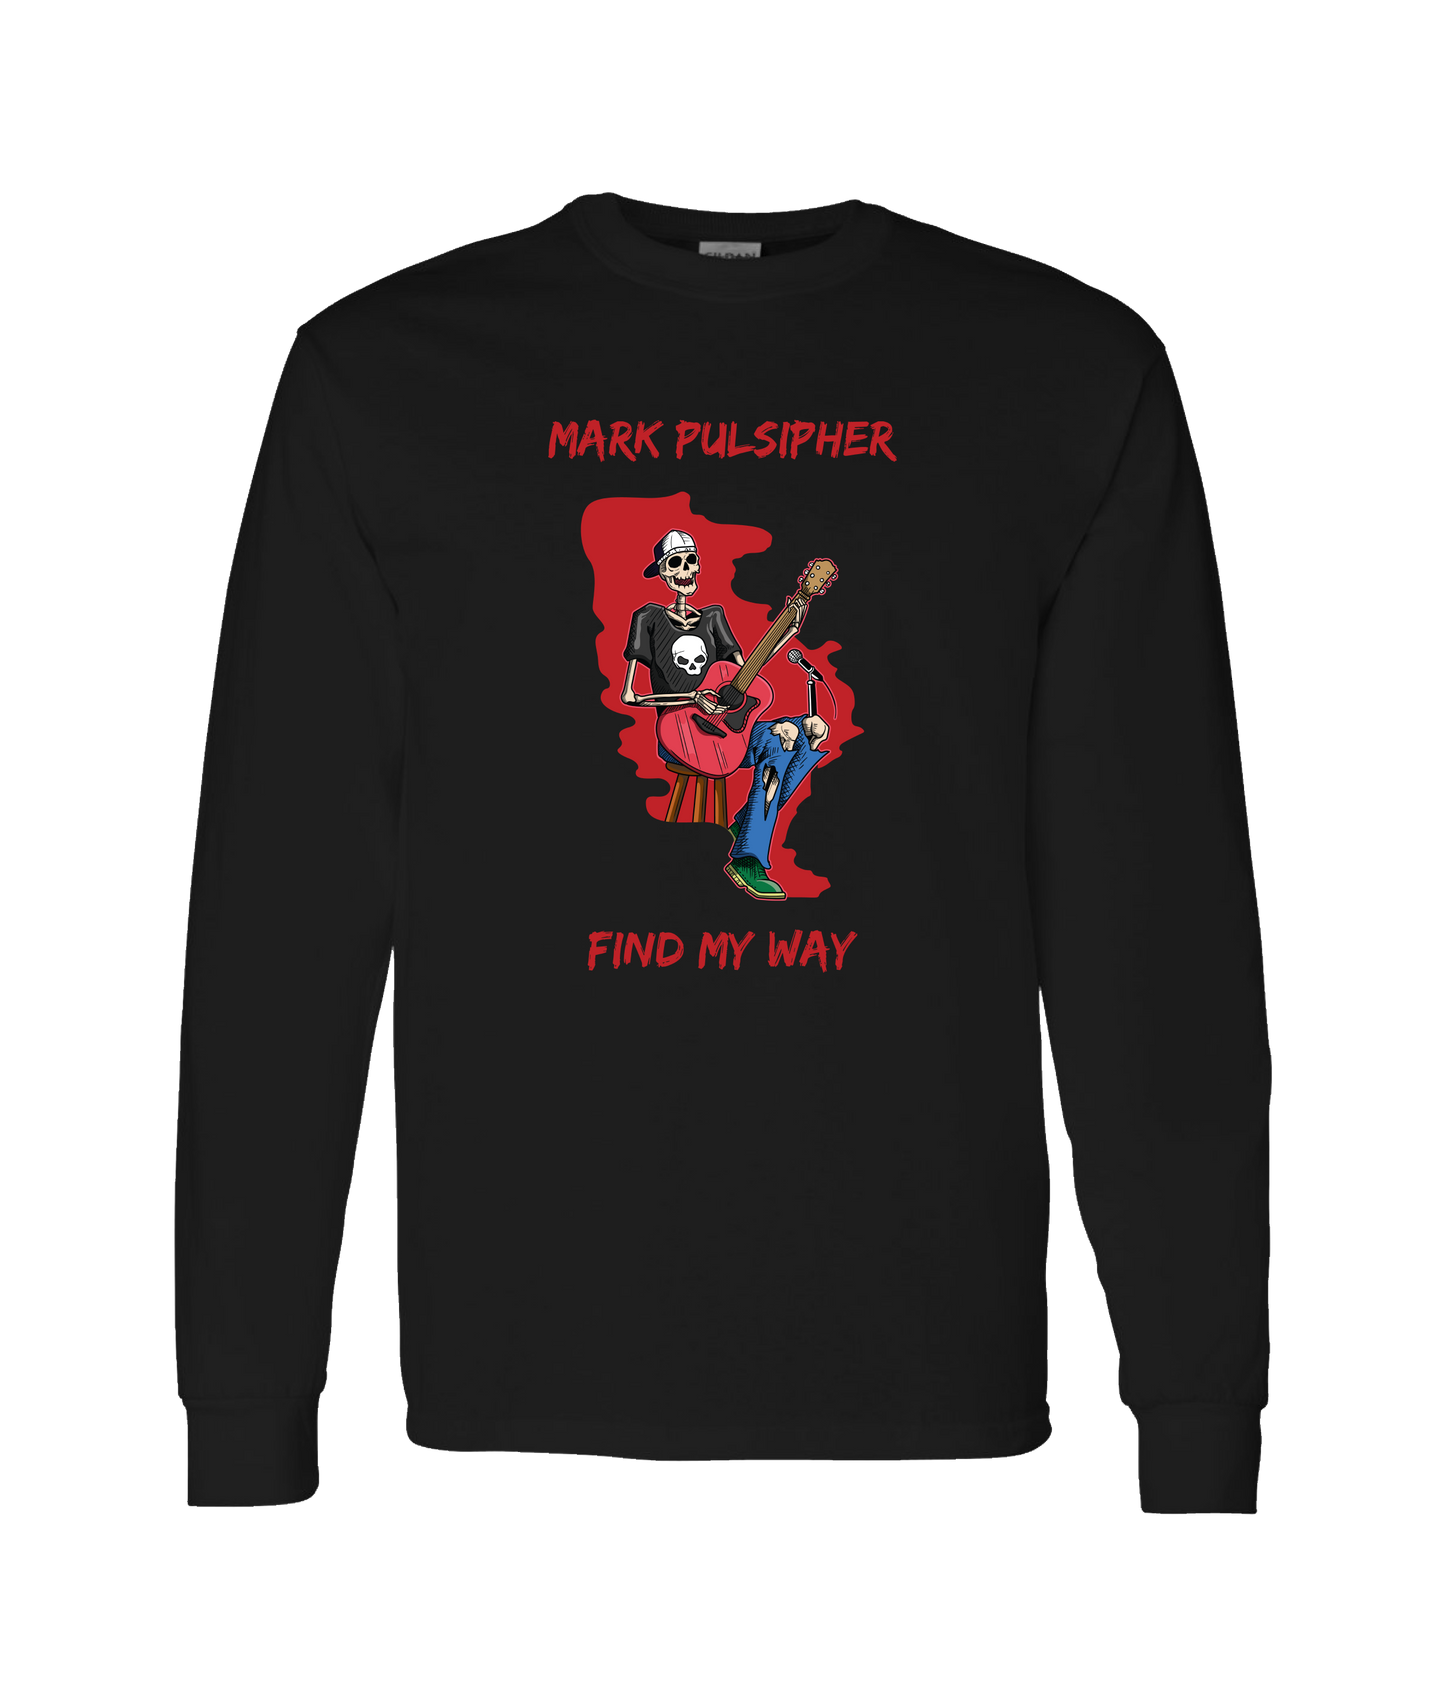 Mark Pulsipher Official - Find My Way - Black Long Sleeve T